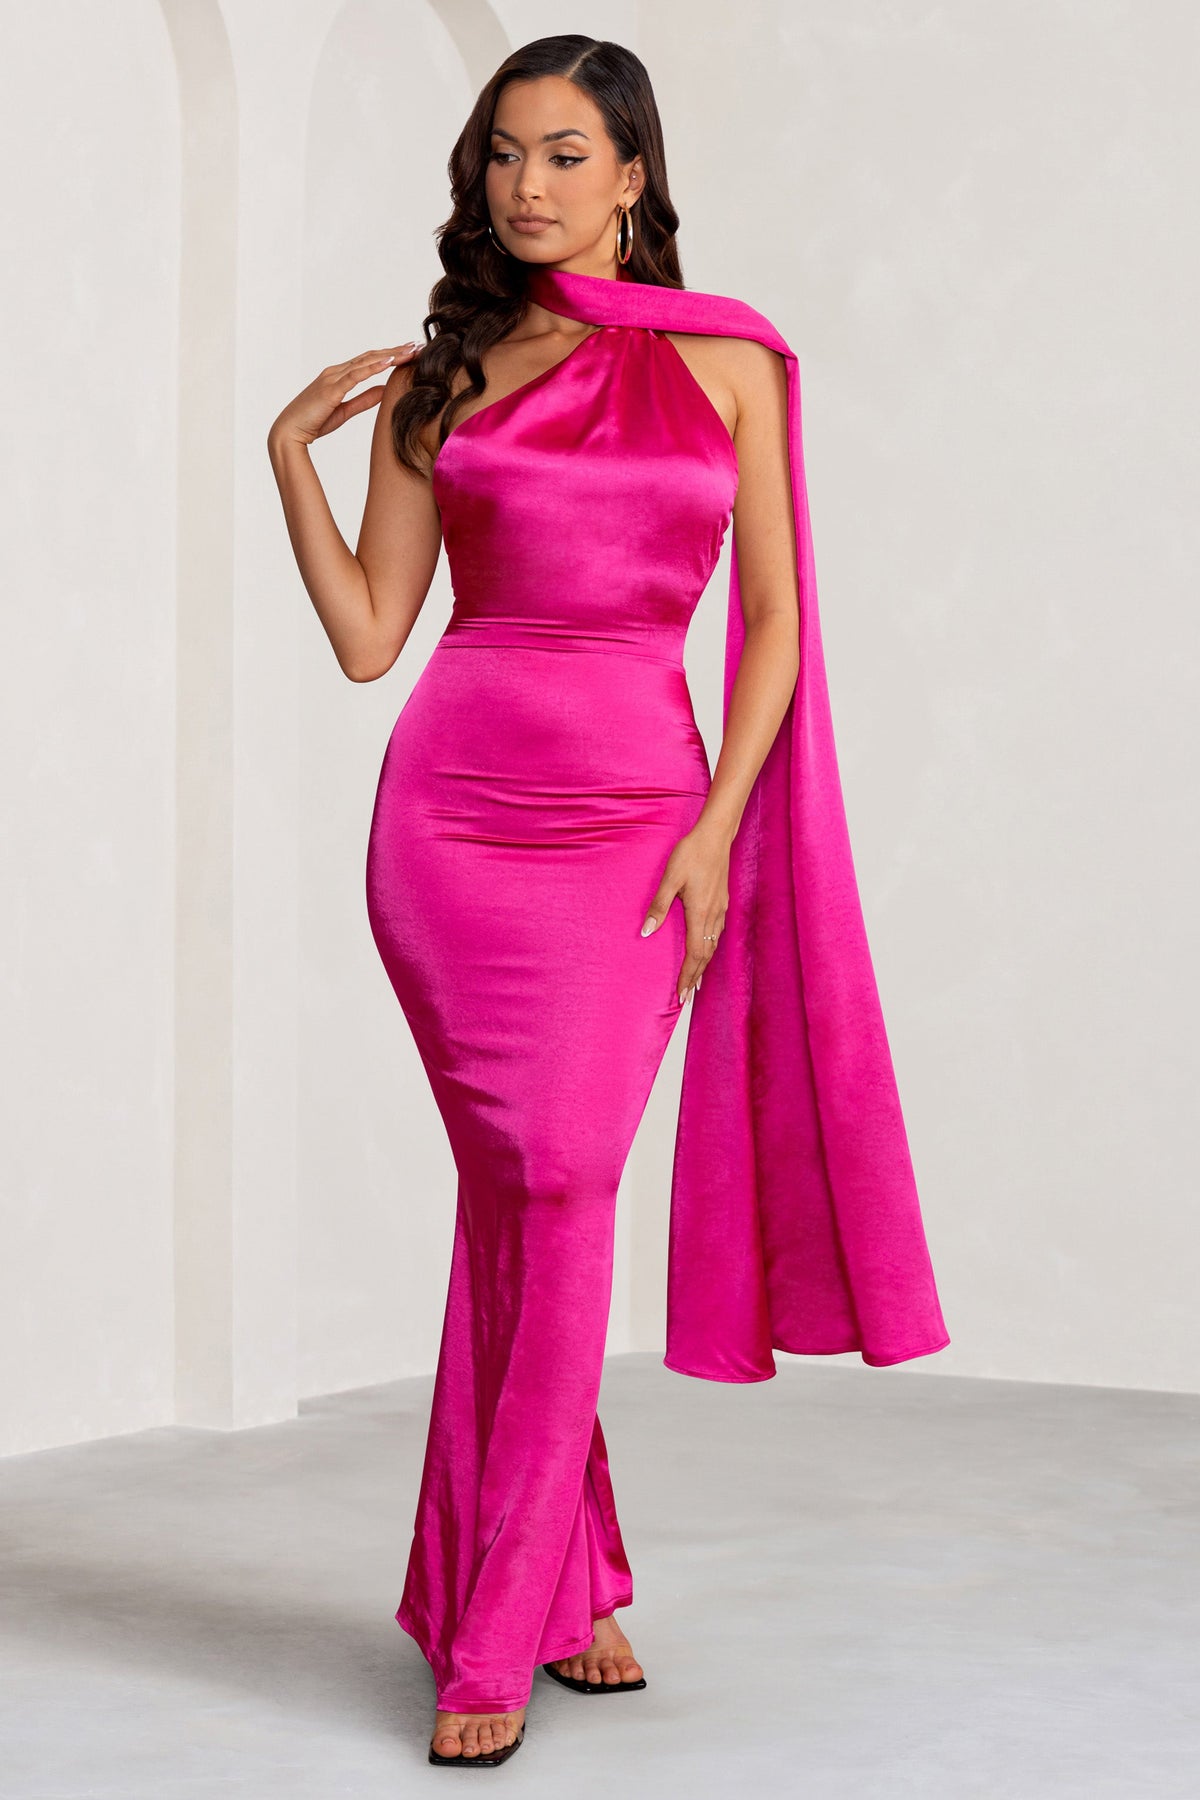 Plus Pink Mesh Ruched Lace Up Backless Asymmetrical Hem Boned